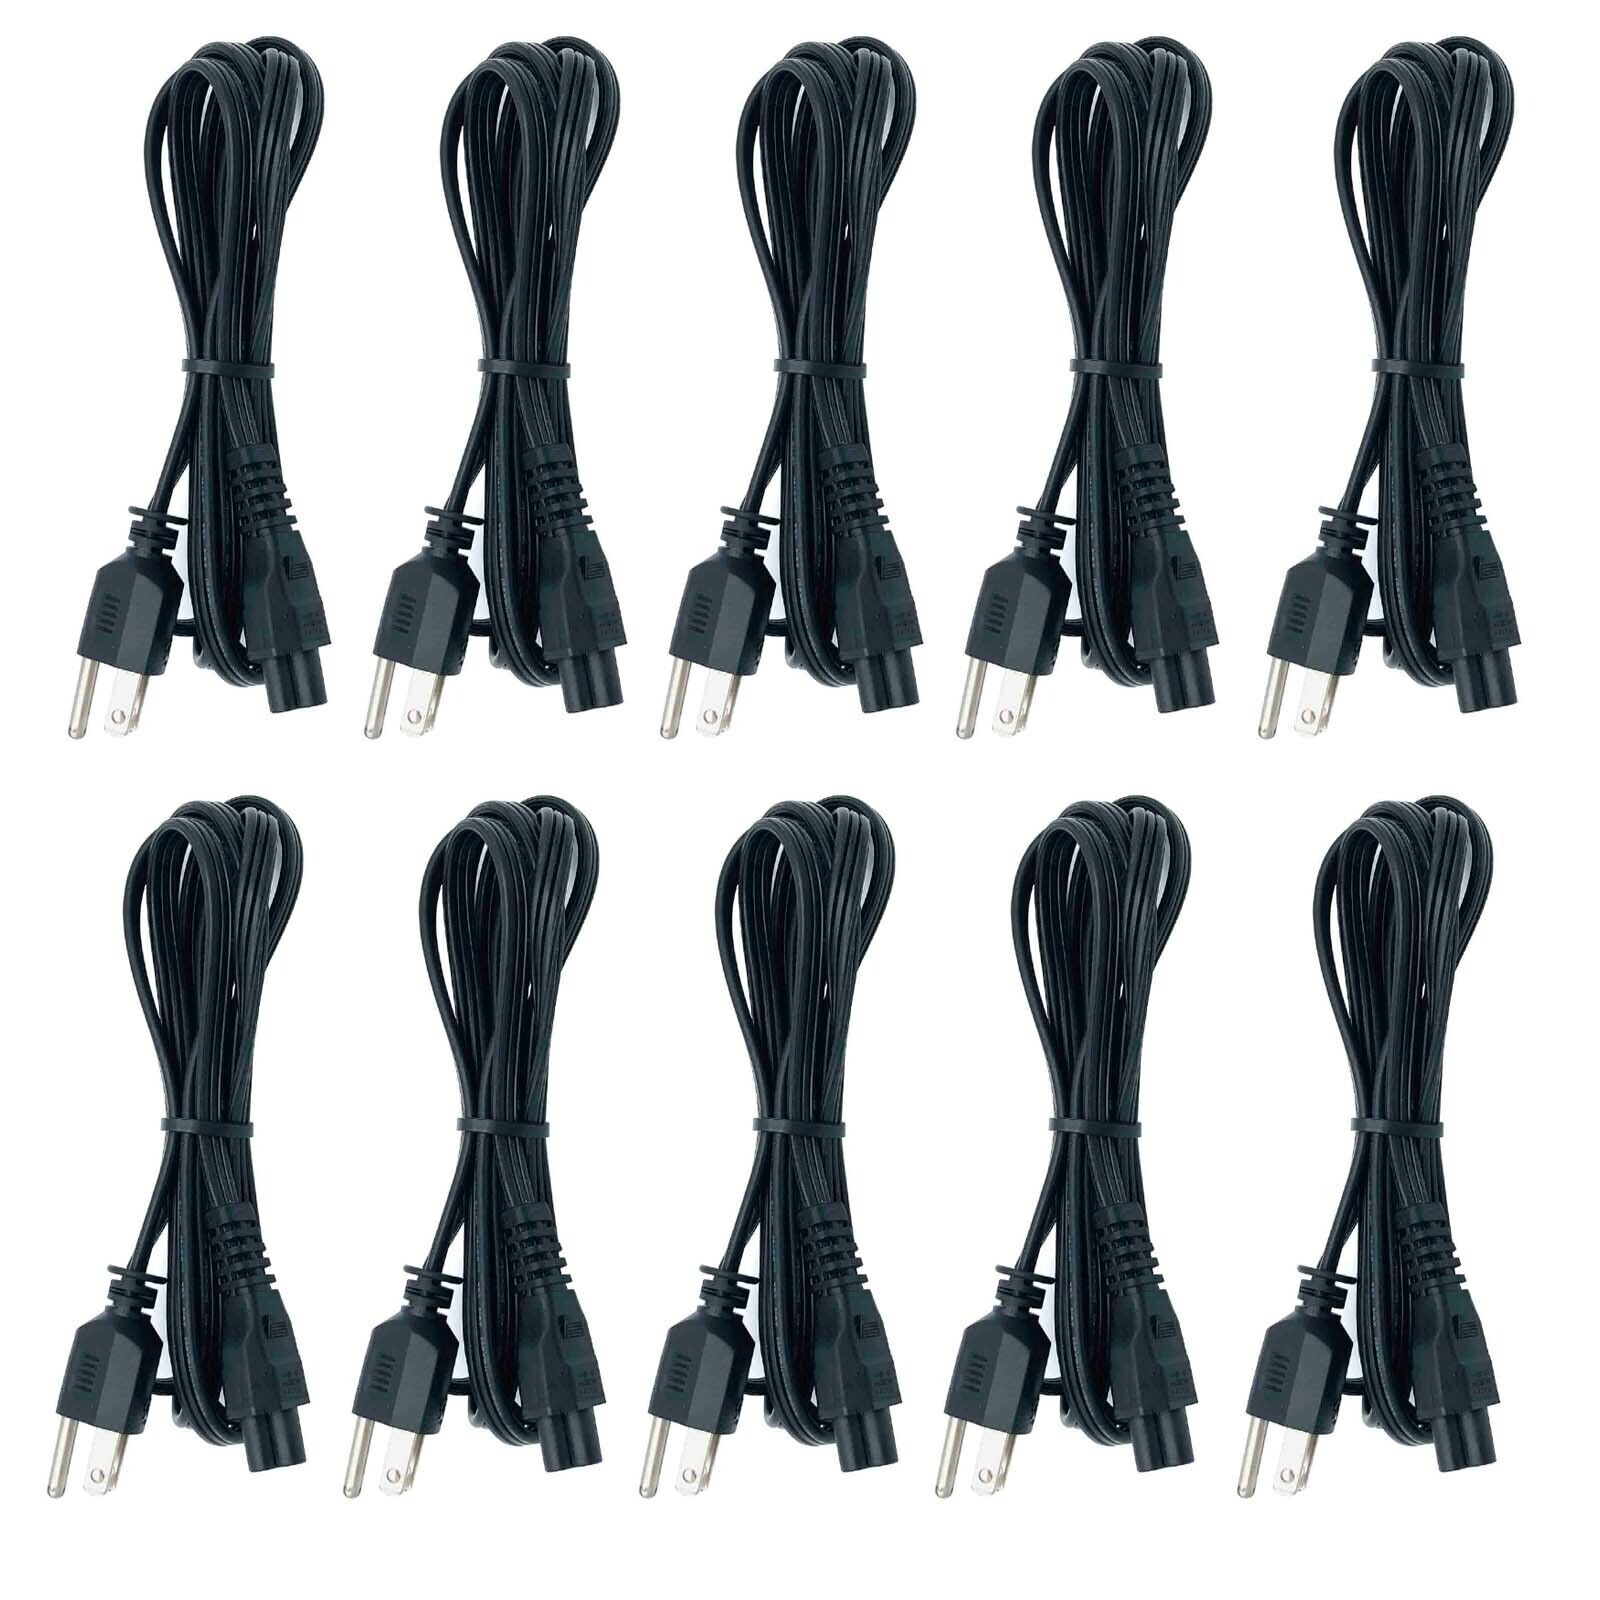 LOT 100 Original 6 ft 3-Prong Mickey Mouse AC Power Cord Laptop Printer Monitor